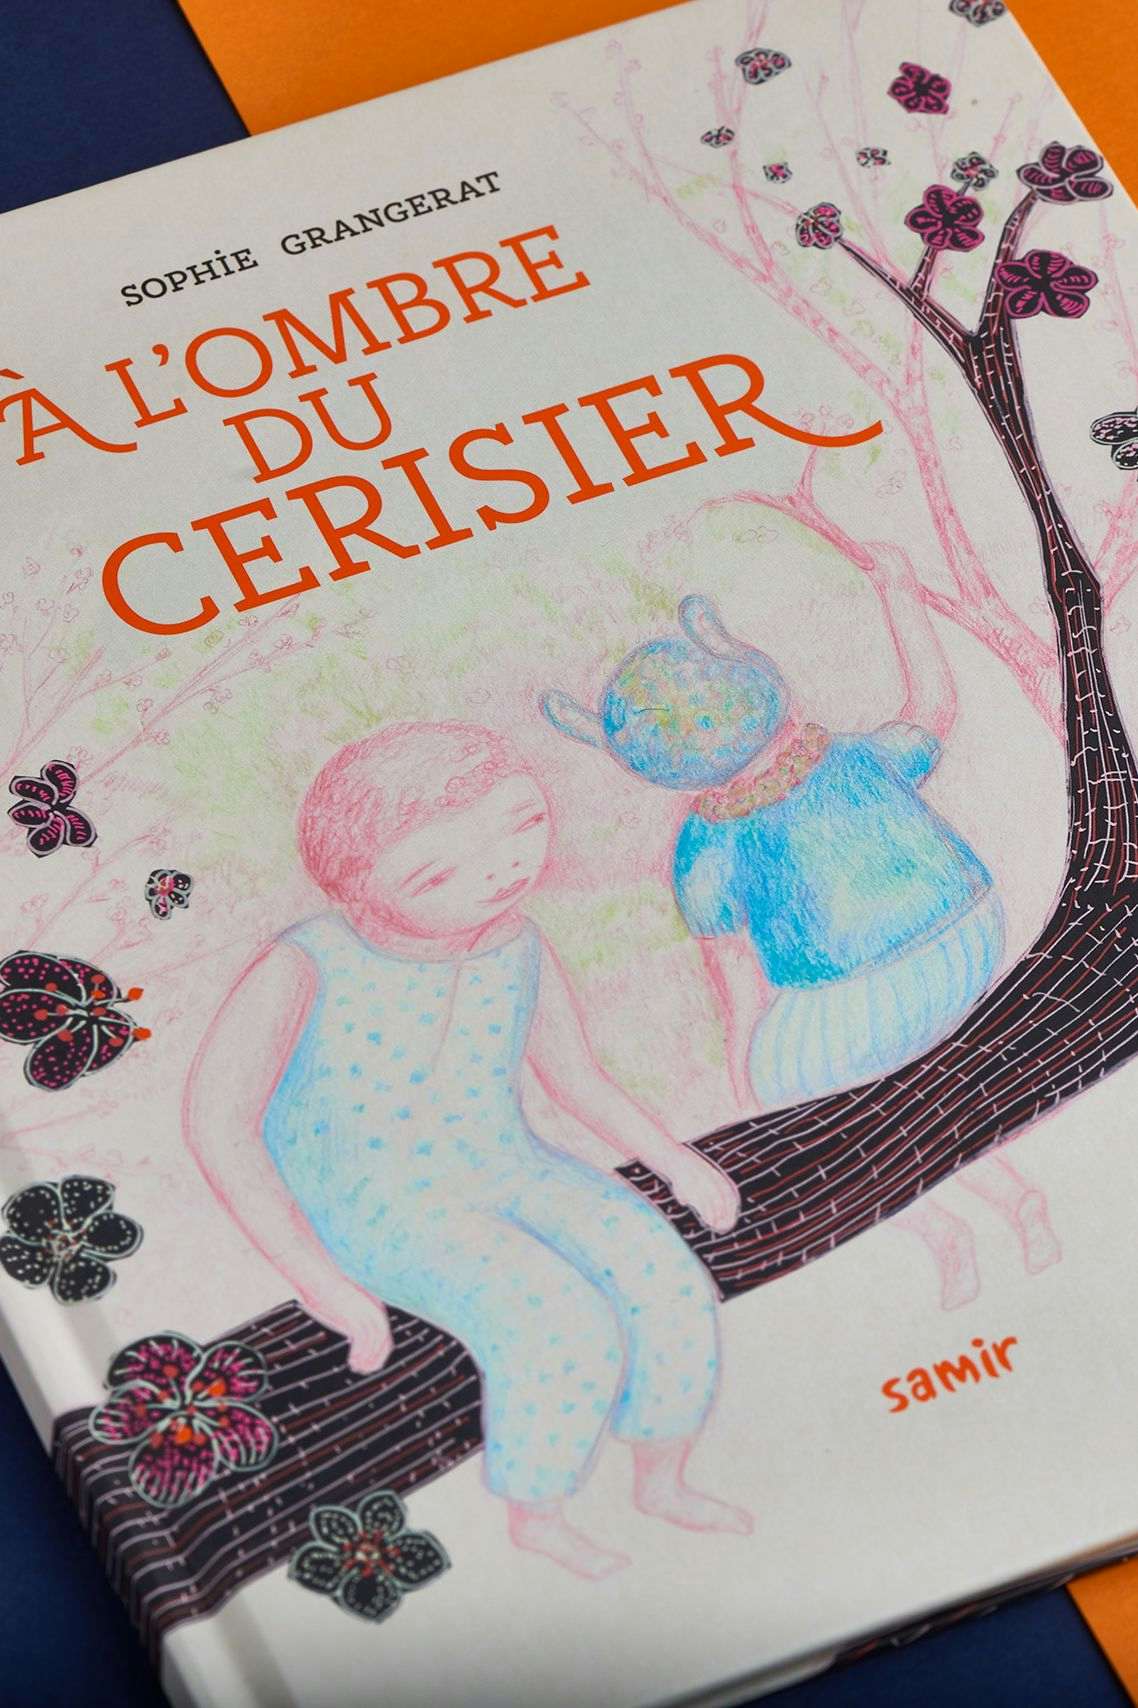 Cover of the latest Sophie Grangerat illustrated book.